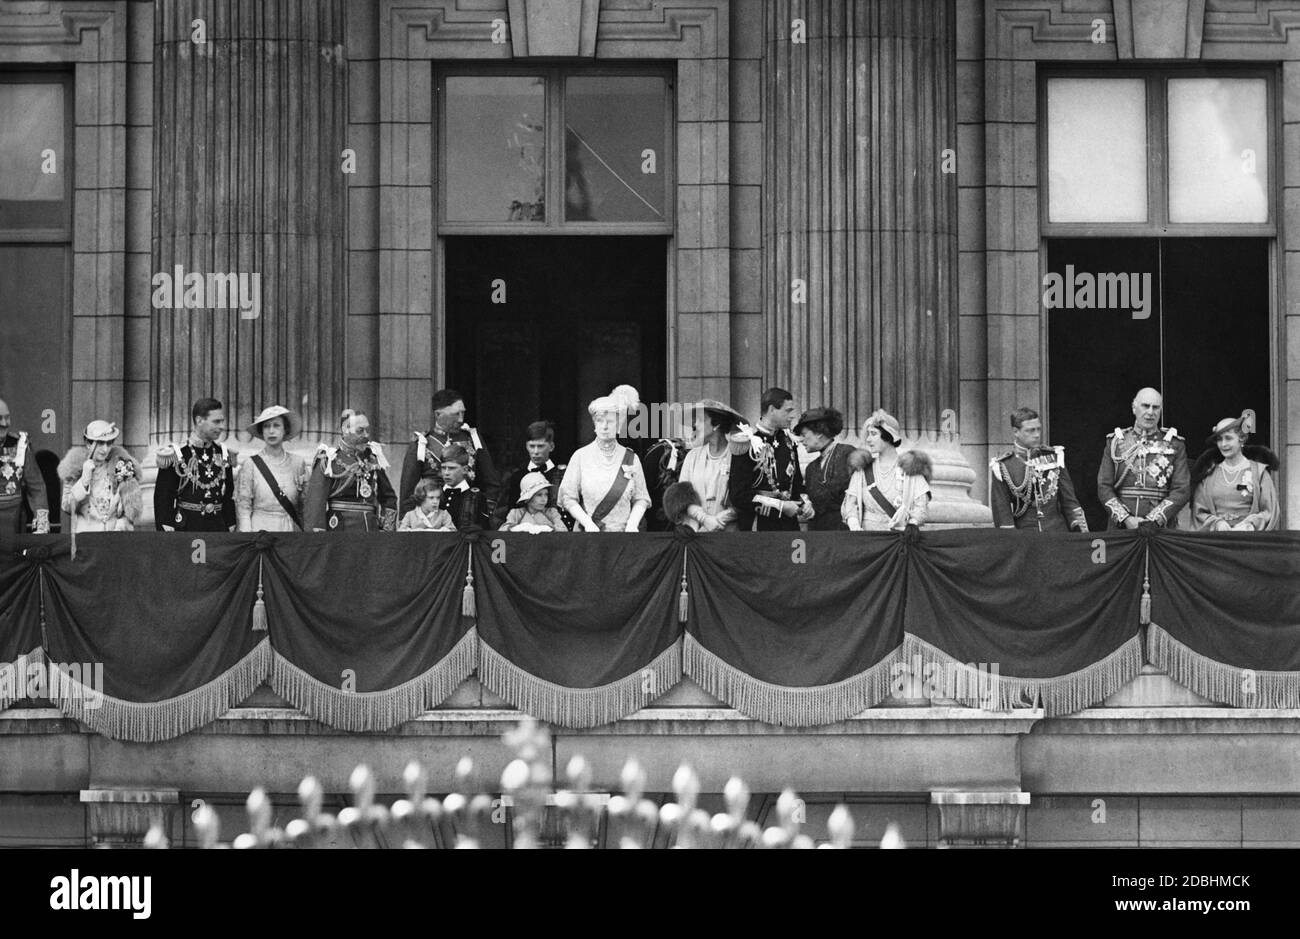 King George V and Queen Mary of Teck with their relatives on the balcony of Buckingham Palace on the occasion of the 25th throne anniversary. From left to right: Prince Arthur of Connaught, Queen Maertha of Norway, Duke of York, Royal Princess Mary, King George V, Princess Margaret Rose, Gerald Lascelles, Earl of Harewood (behind), Princess Elizabeth, Viscount Lascelles (behind), Queen Mary, Duchess Marina and Duke George Edward of Kent, Princess Victoria, Duchess of York, Princess of Wales, Earl and Countess of Athlone. Stock Photo